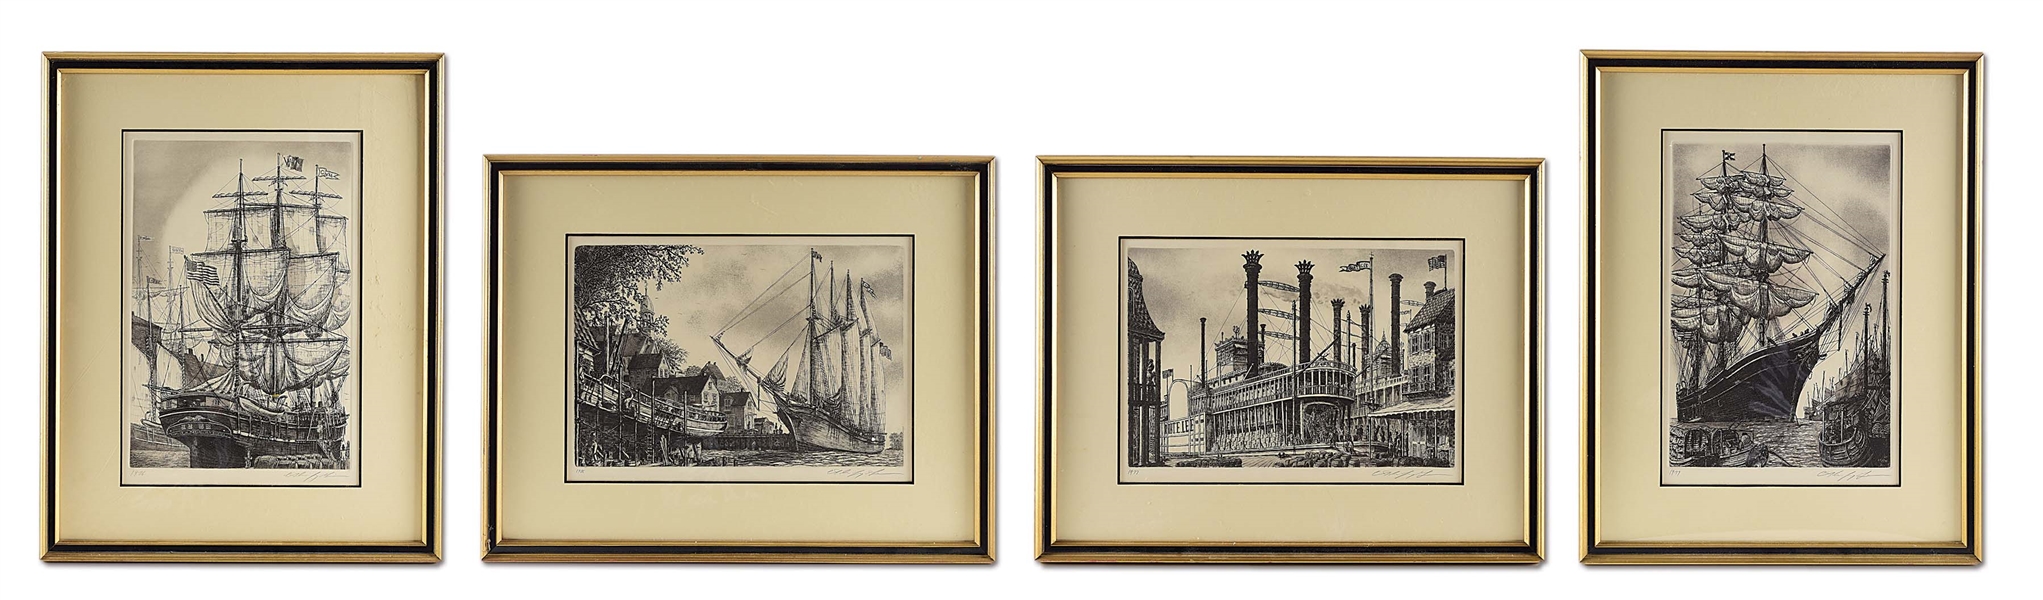 LOT OF 4: ALAN JAY GAINES "HISTORIC SHIPS OF AMERICA" ETCHINGS.